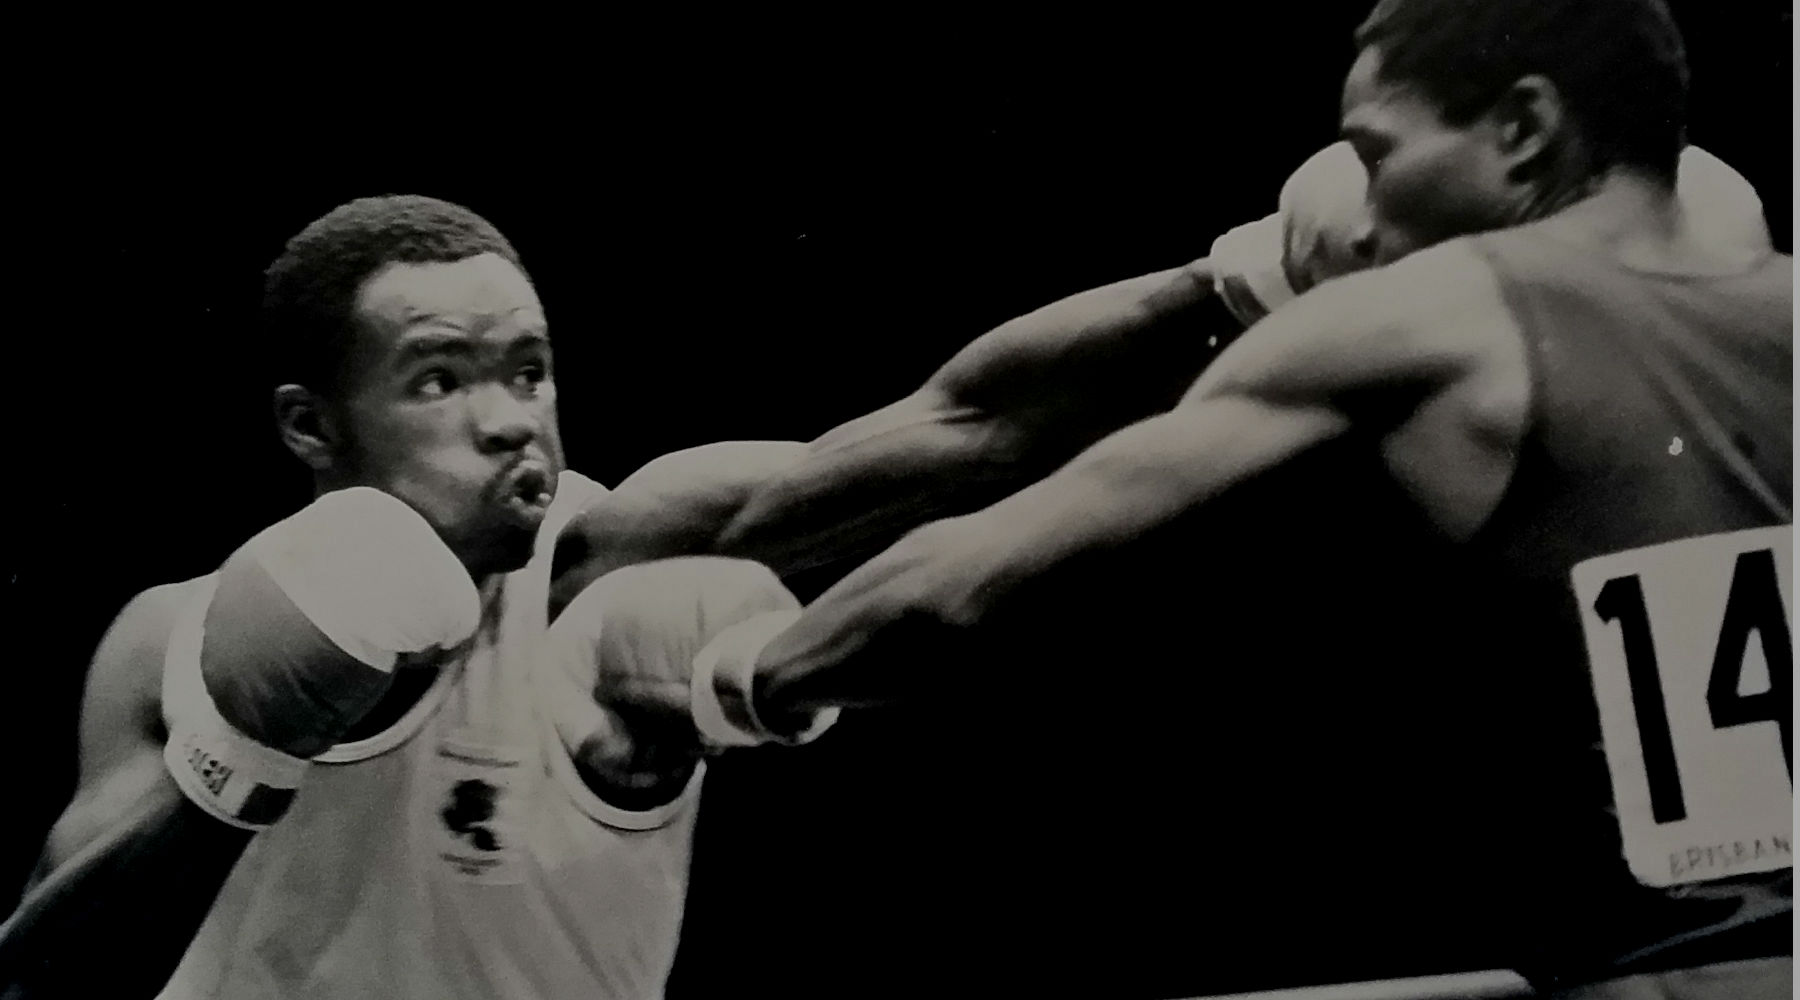 Clyde Mcintosh throwing a perfect left jab in a boxing match.